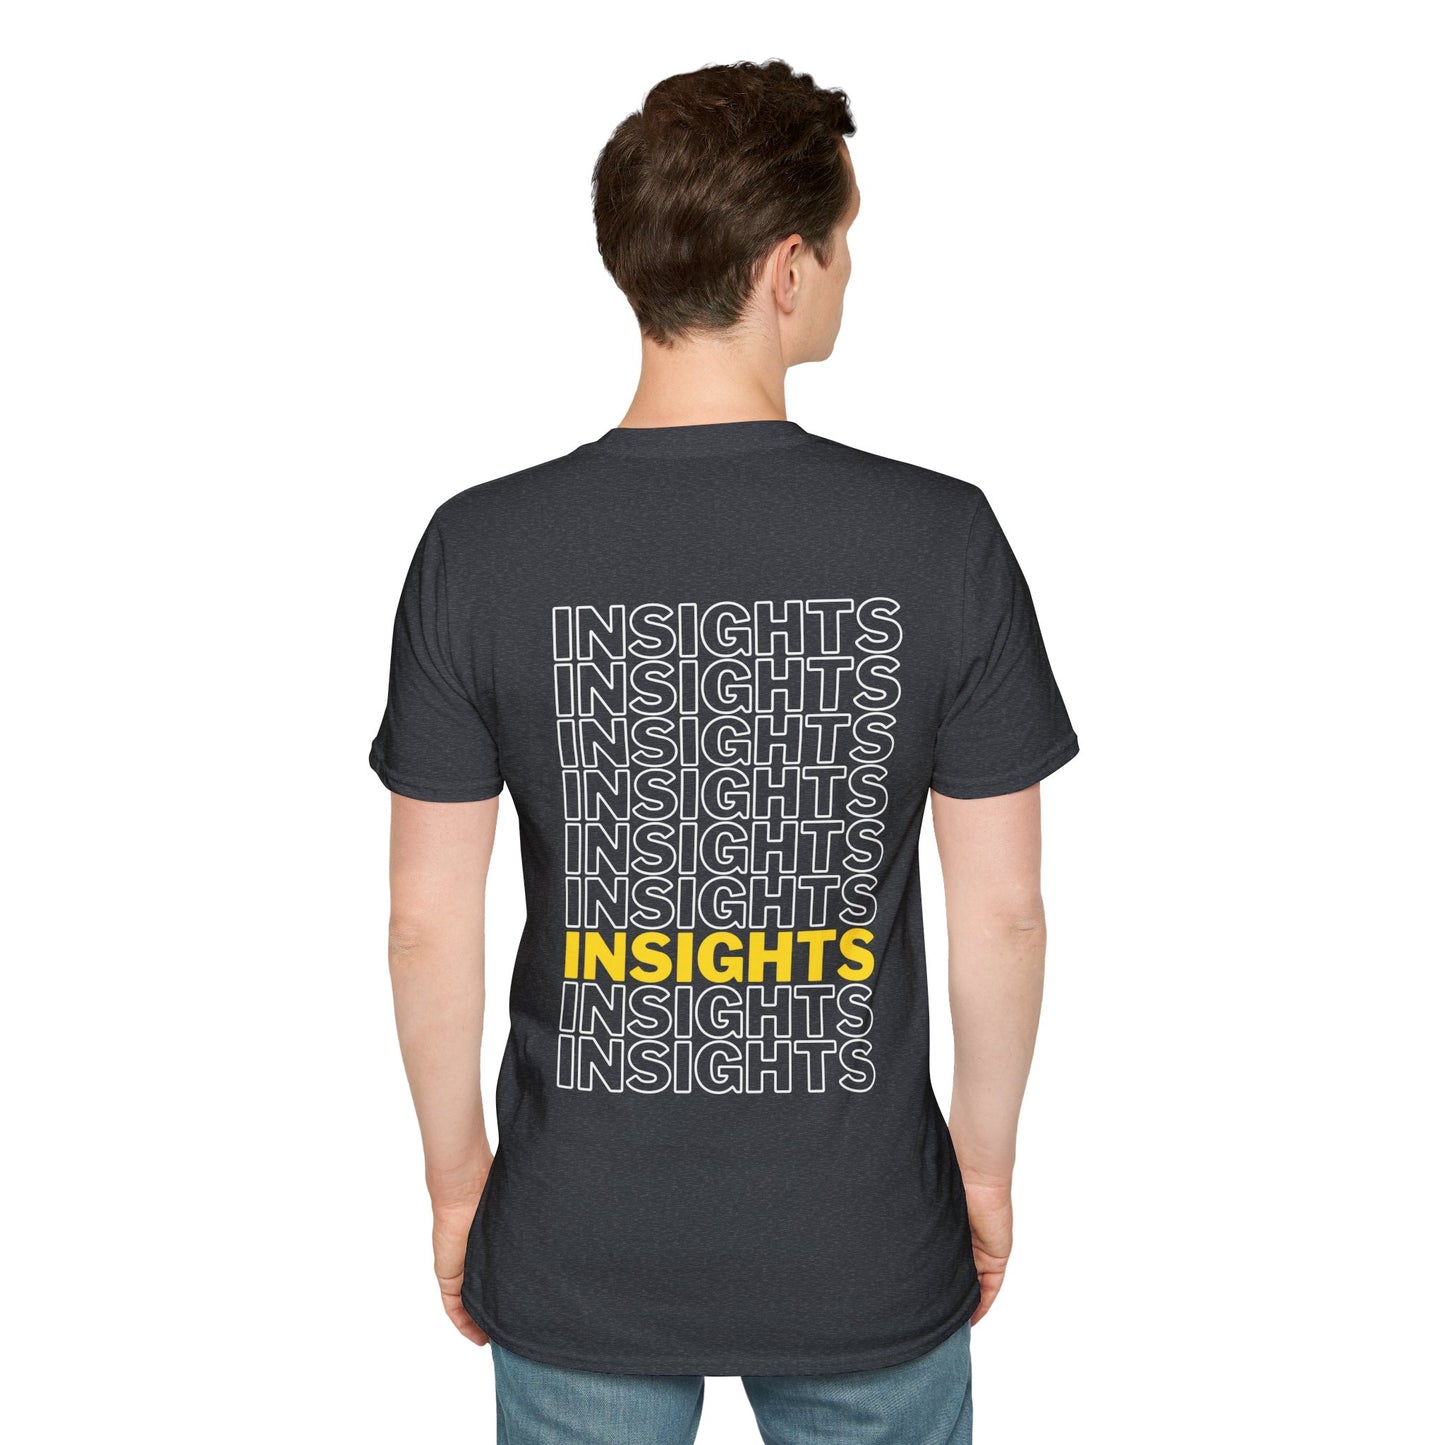 Heather Grey T-shirt with the word ‘INSIGHTS’ repeated in white text and one instance highlighted in yellow